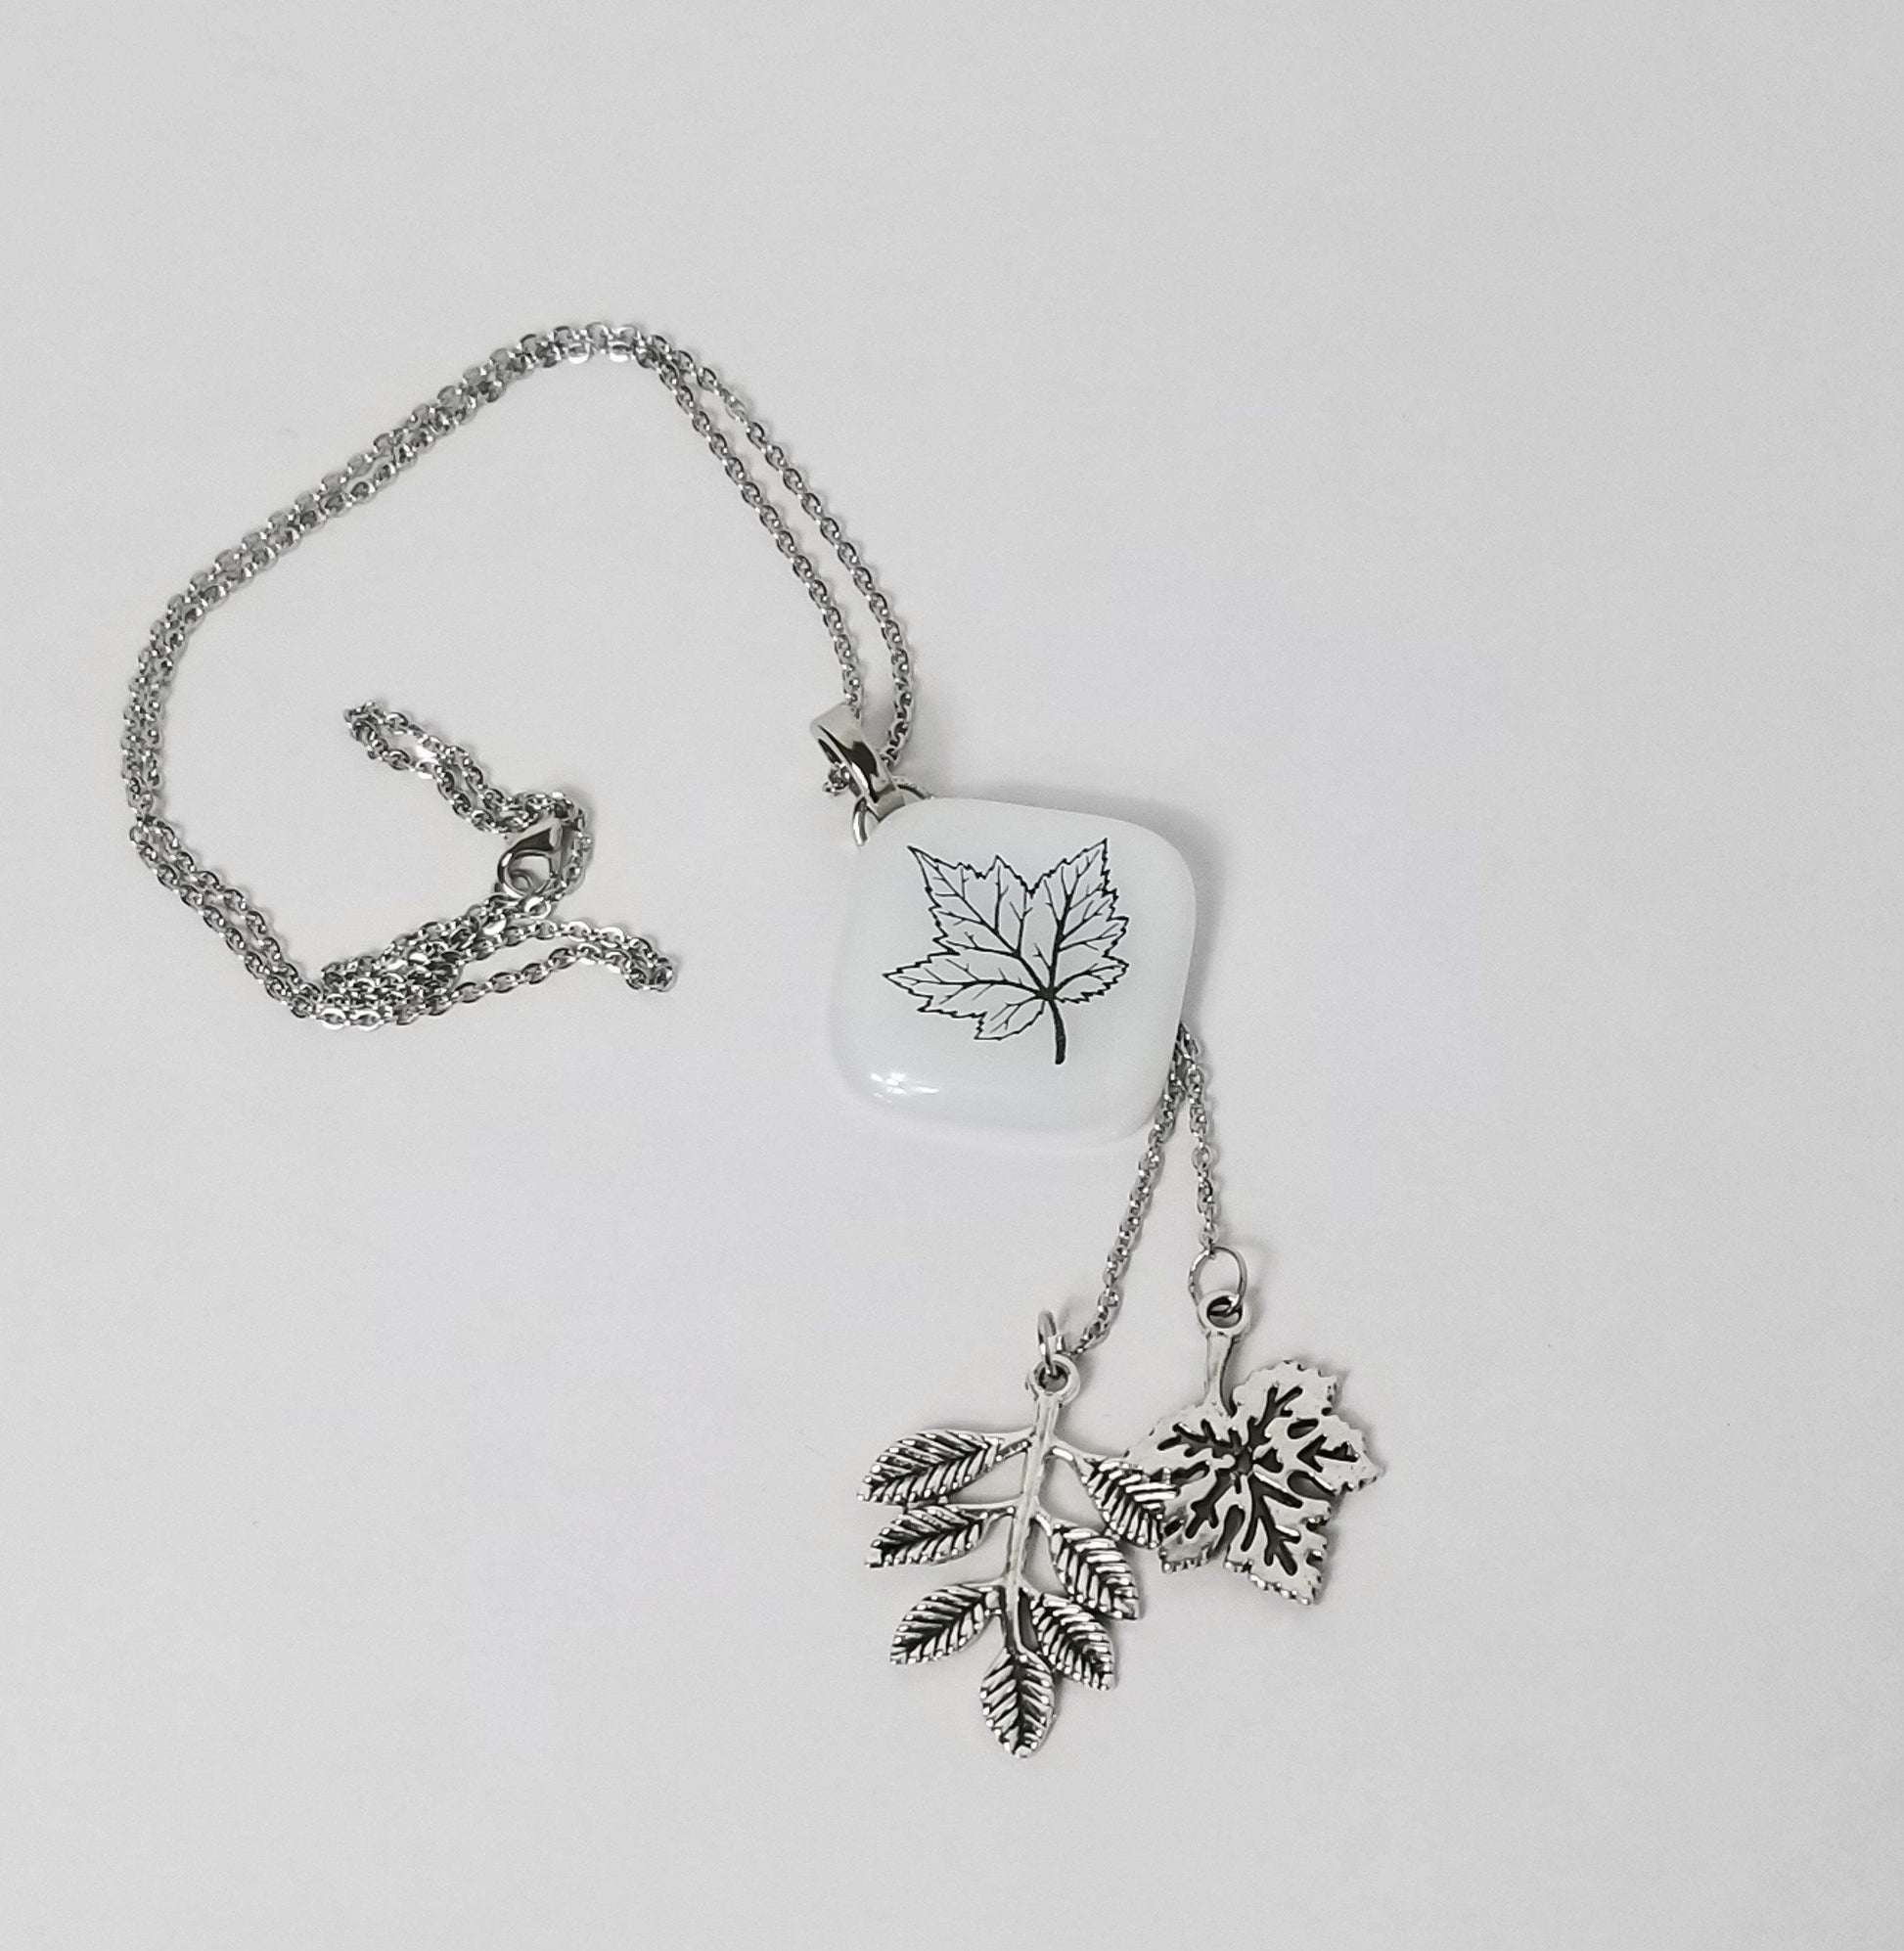 Maple Leaf Nature Necklace, Fused Glass and Stainless steel chain and leaves from seeds glassworks